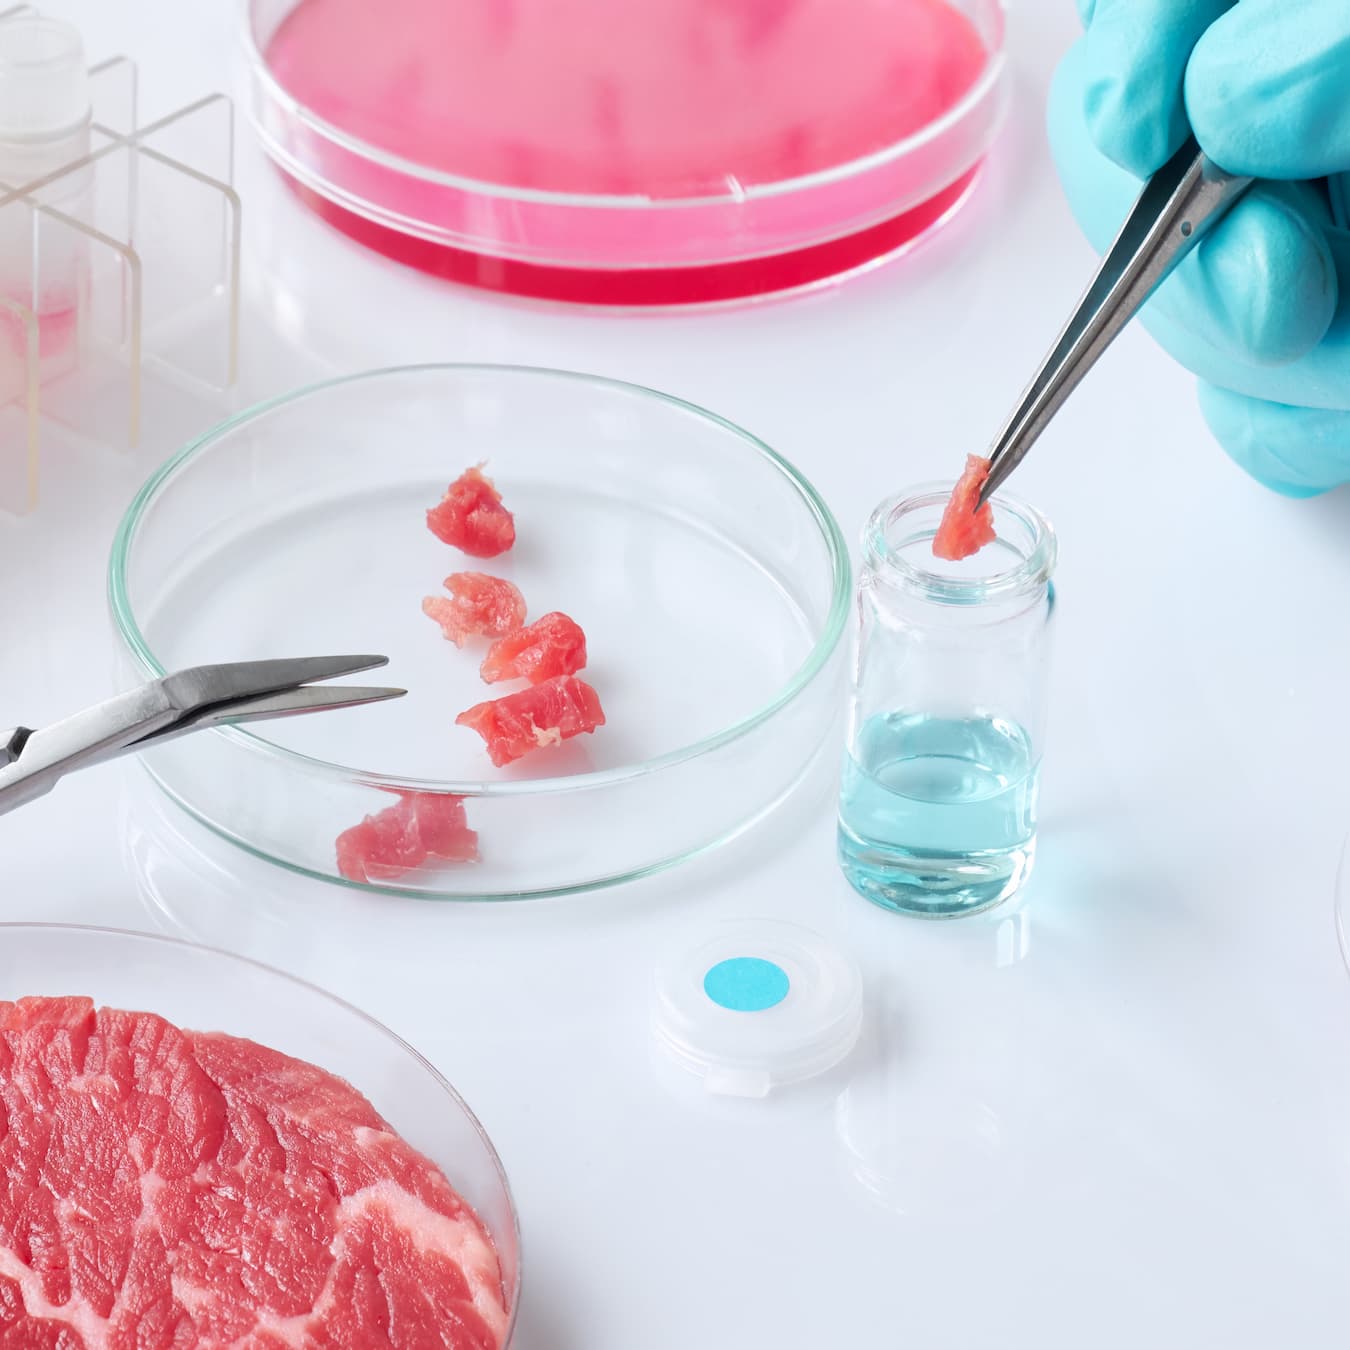 meat-sample-open-disposable-plastic-cell-culture-dish-modern-laboratory-production-facility